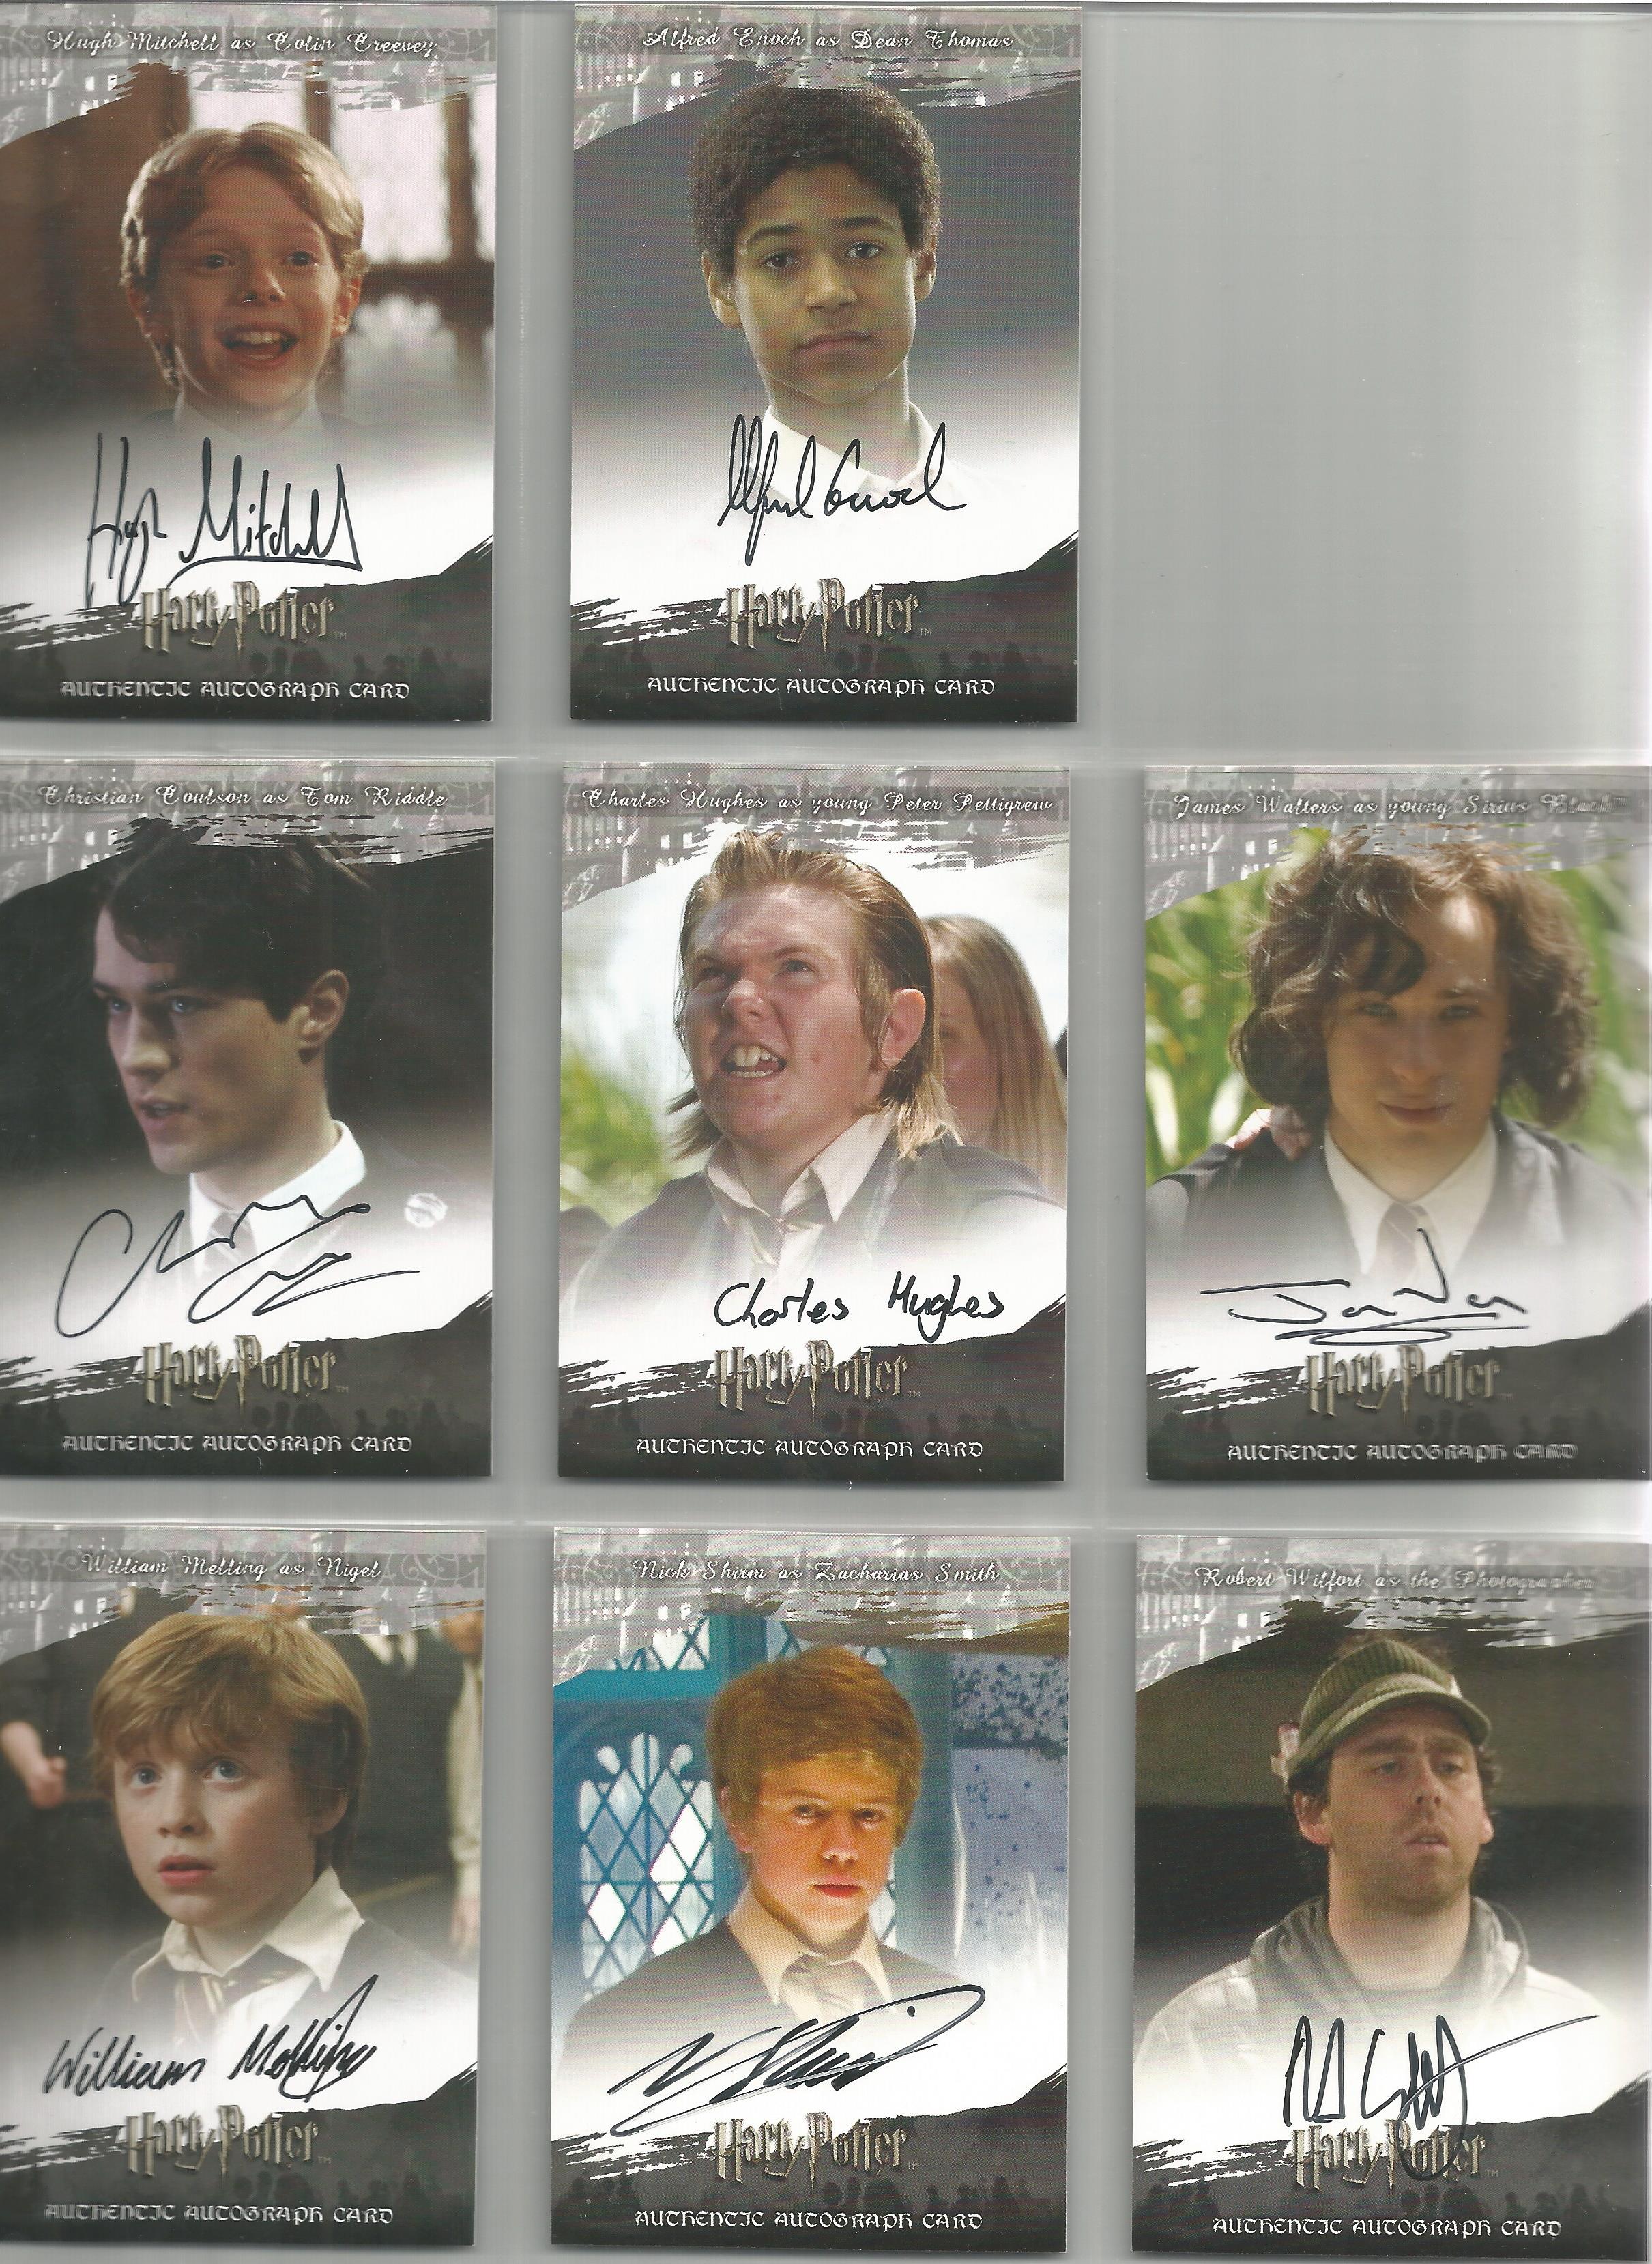 Harry Potter 3D second edition collection of 8 autographed Artbox trading cards. Each card has